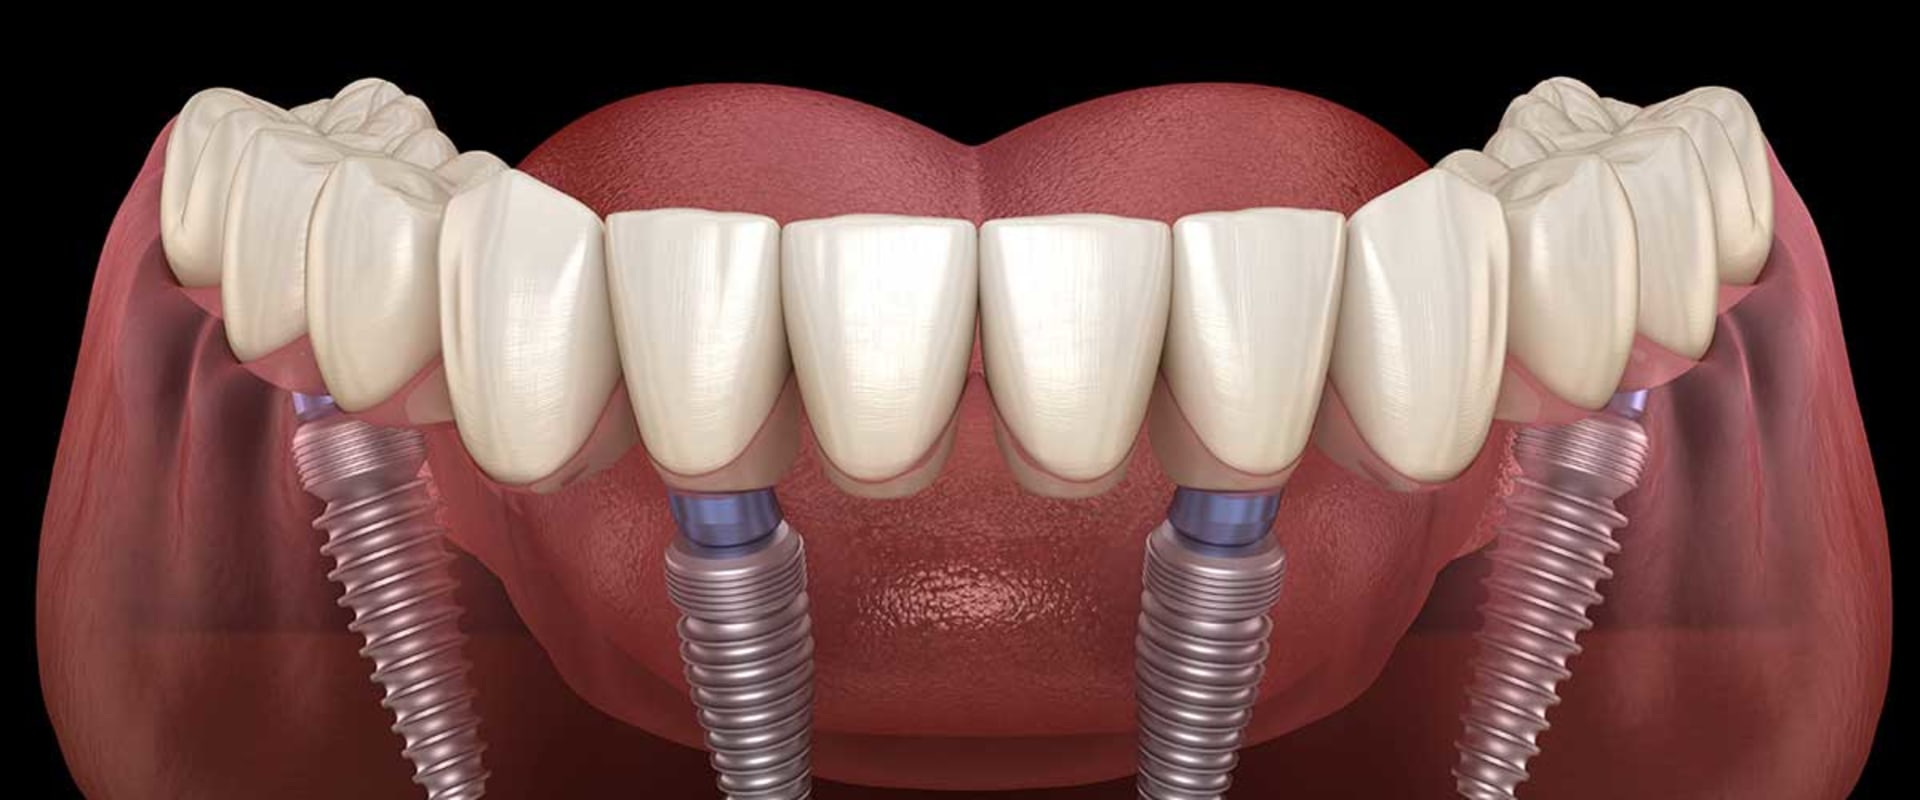 What Type of Anesthesia is Used for All-on-Four Dental Implants?